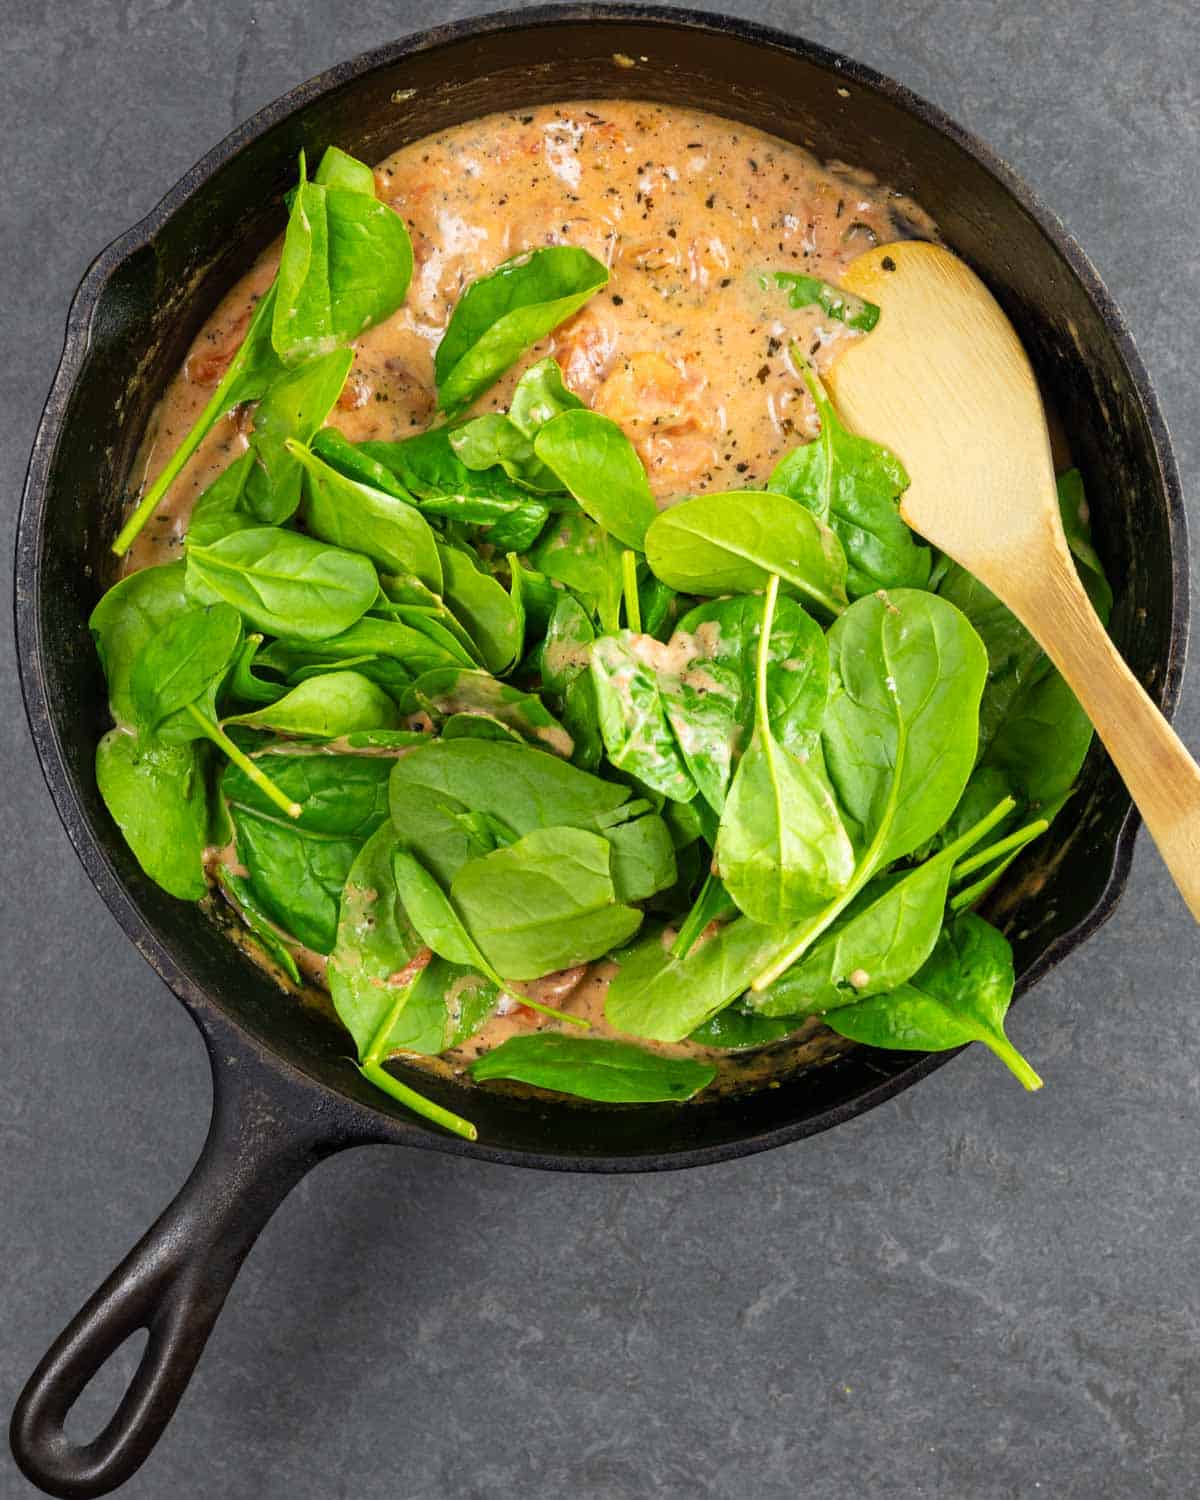 Simmered sauce with fresh spinach leaves added to a cast iron skillet.